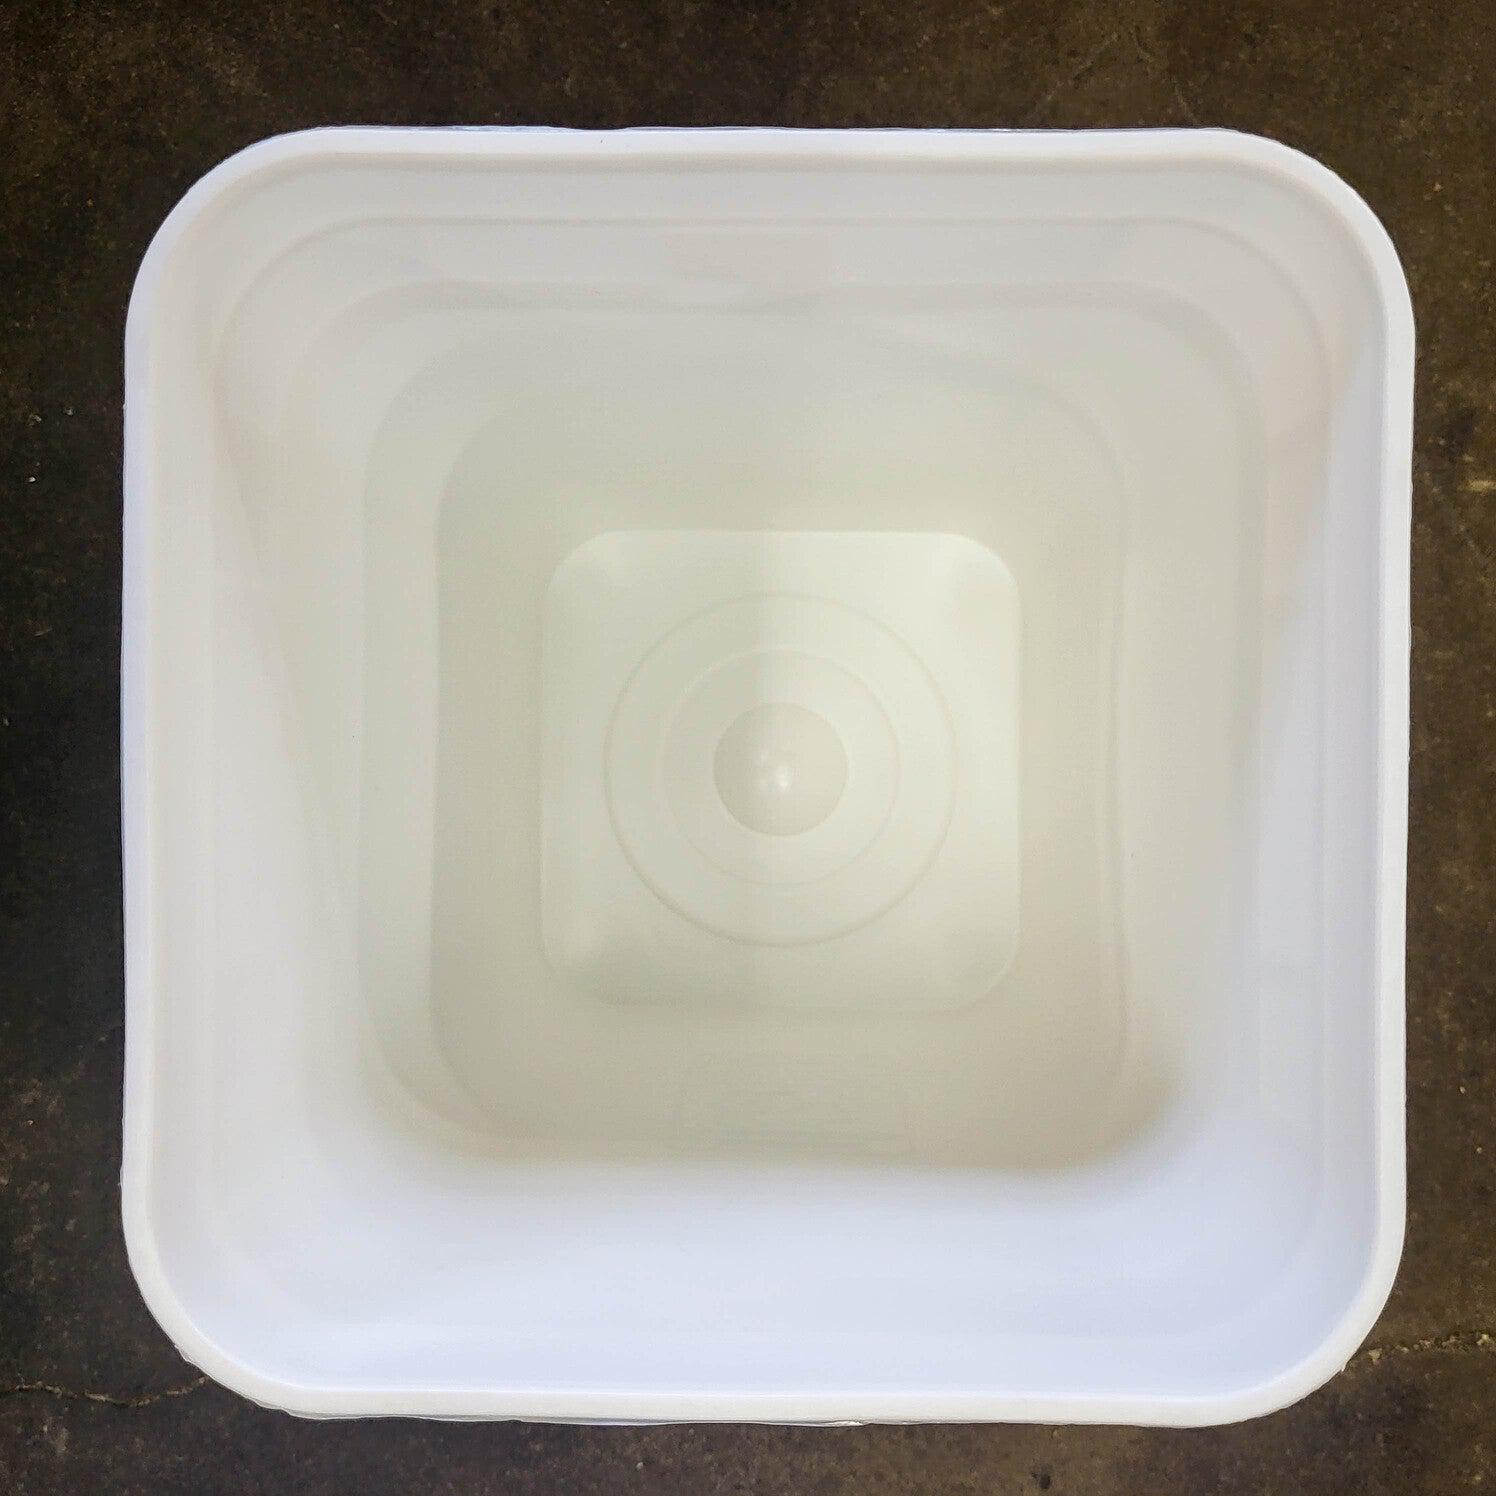 4 Gallon White Square Plastic Pail with Metal Handle (P8 Series)